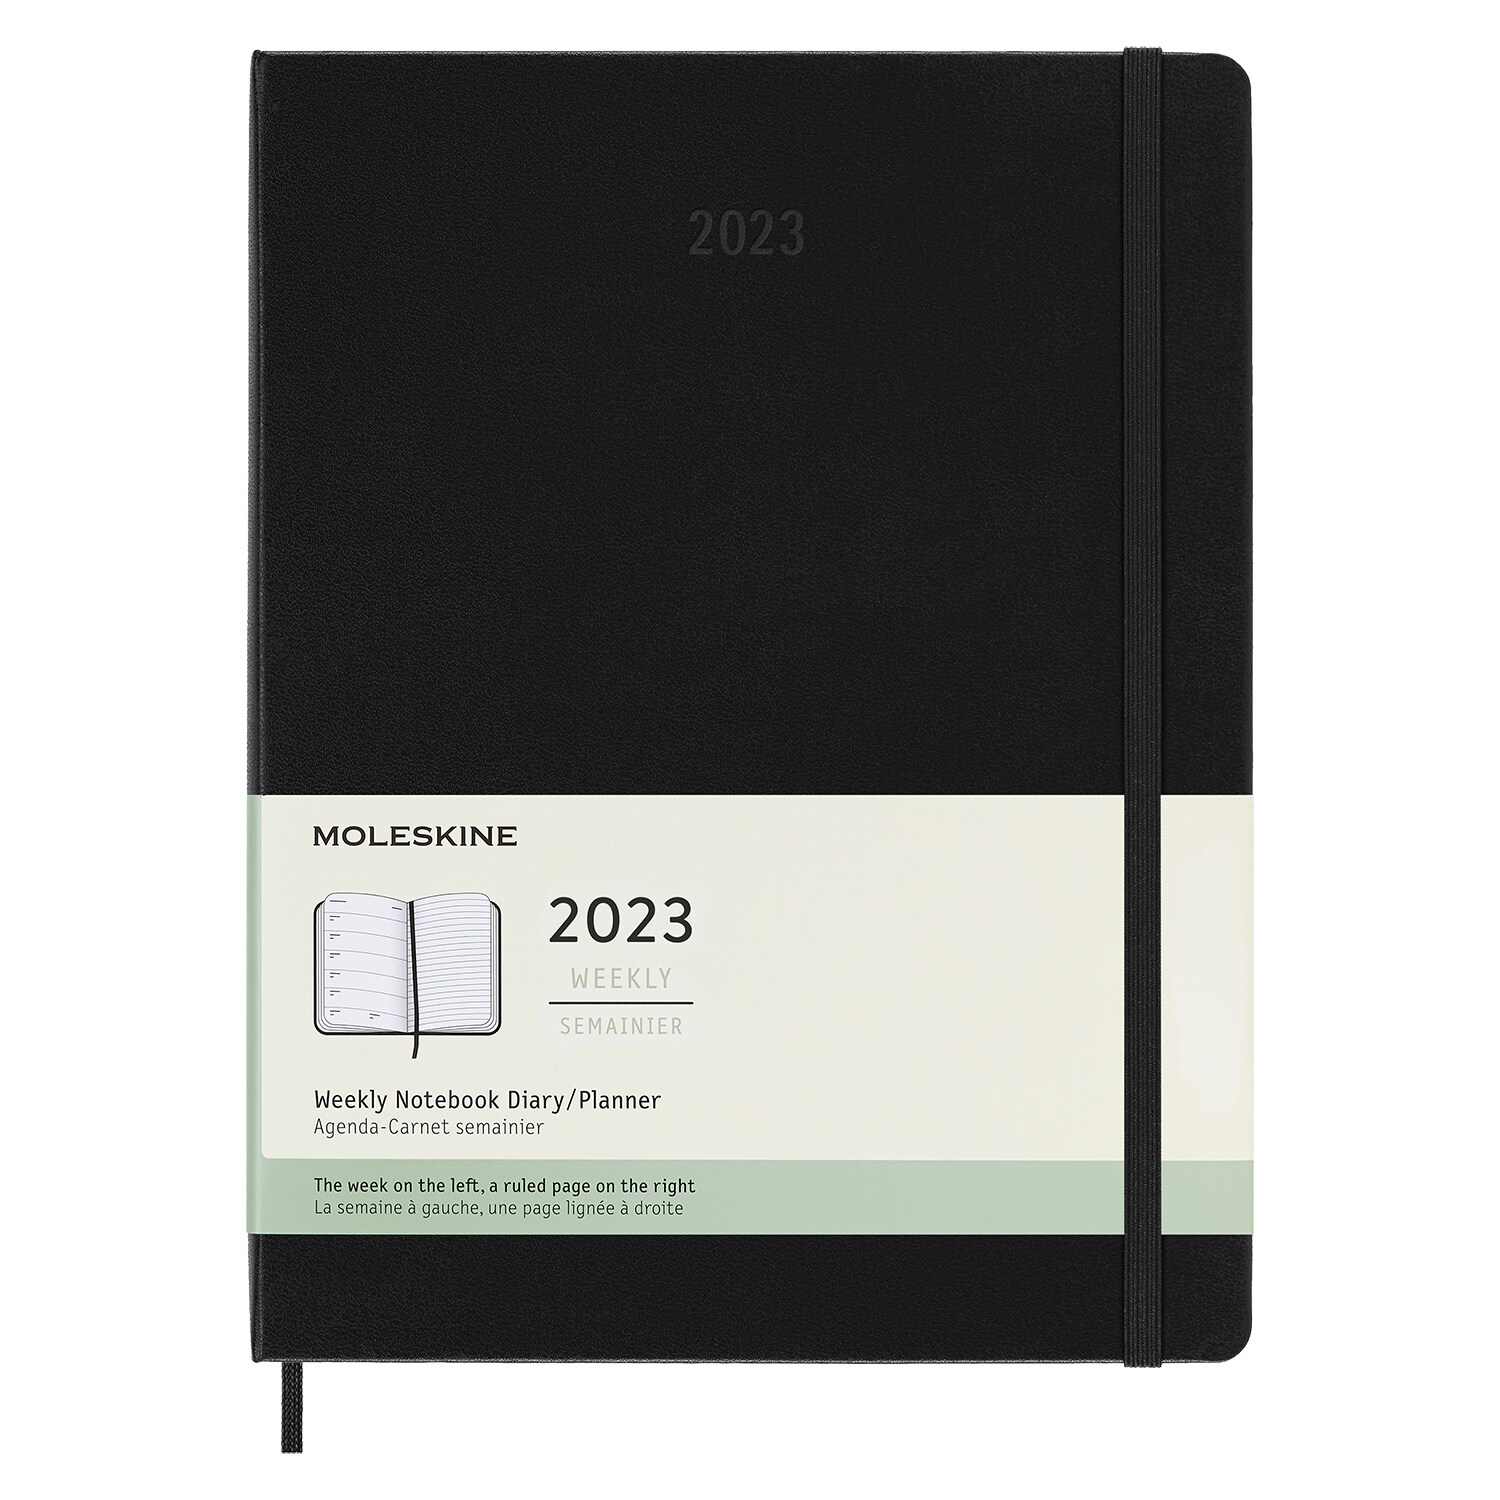 Moleskine 2023 Weekly Notebook Planner, 12m, Extra Large, Black, Hard Cover (7.5 X 10) (Other)